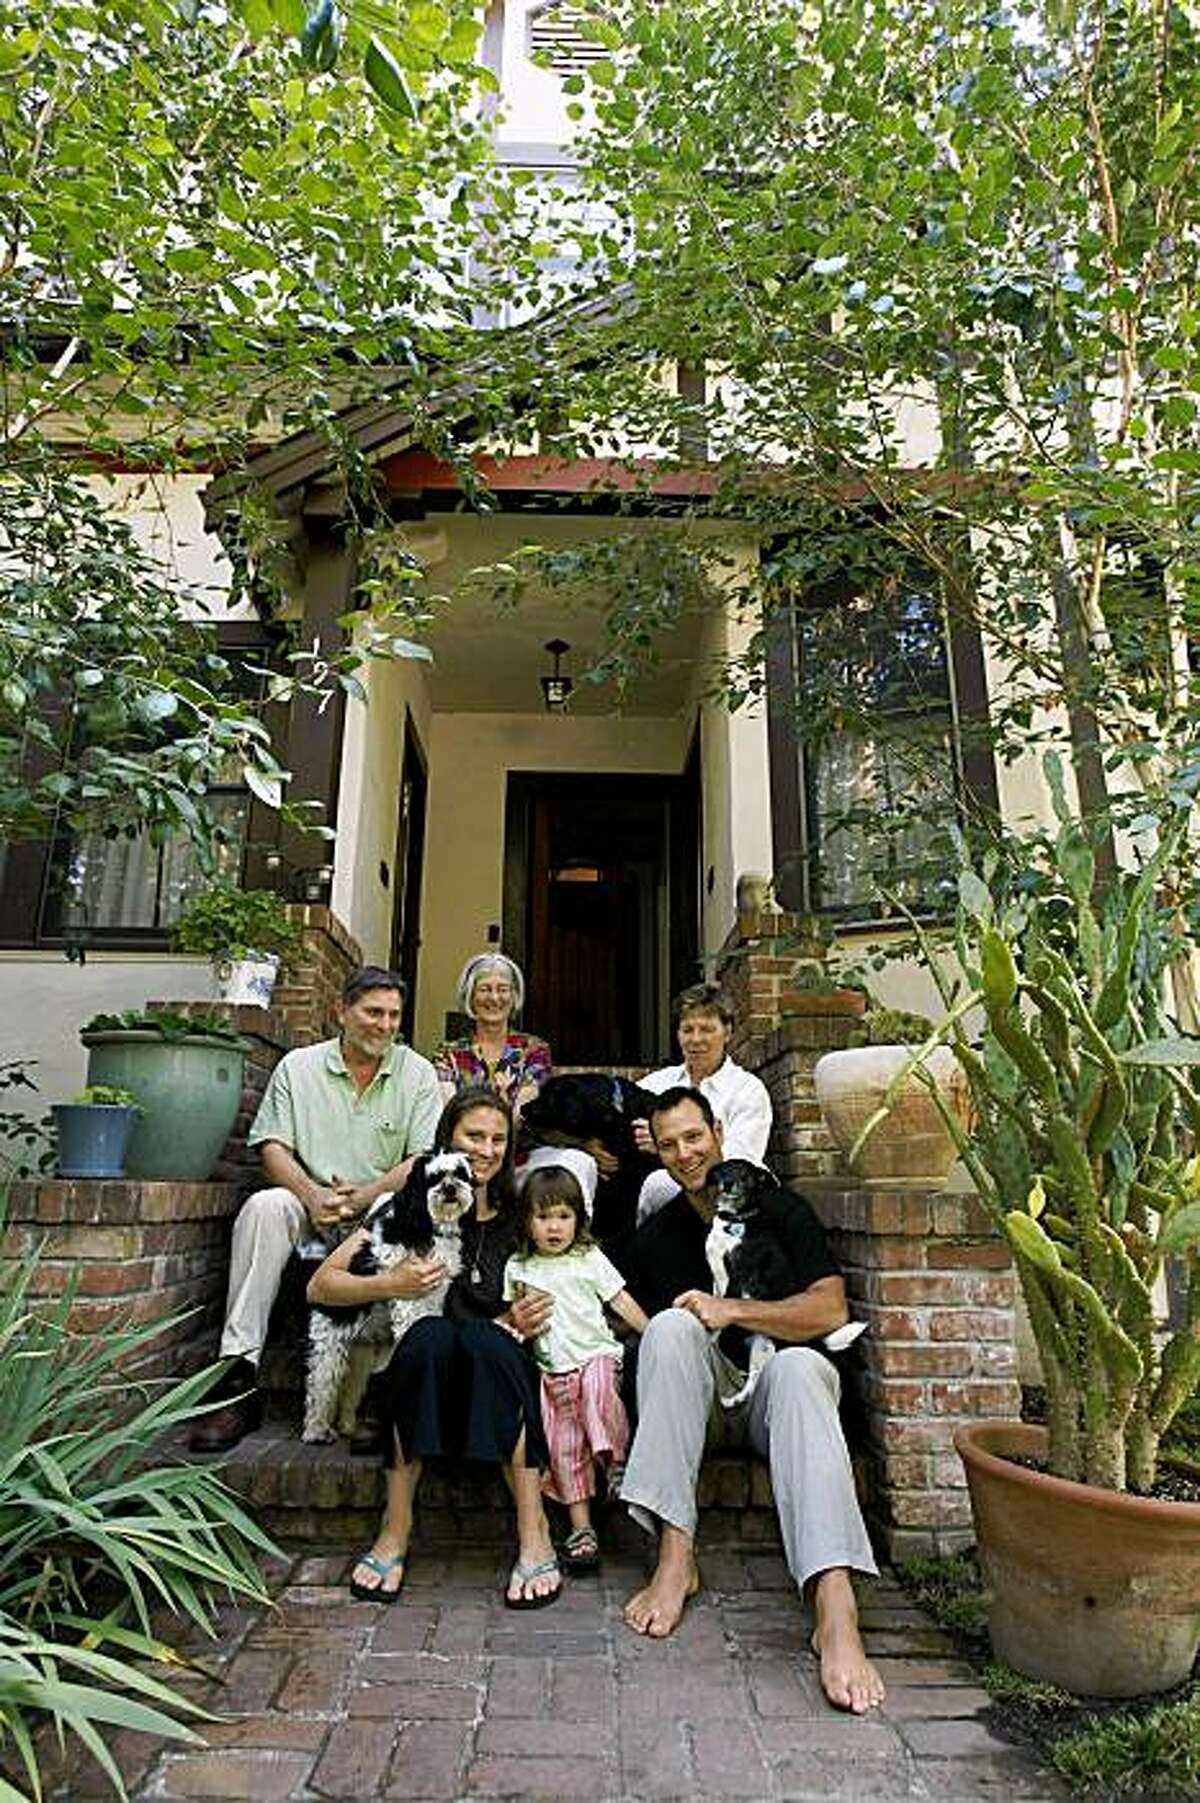 Ben Ladomirak, bottom right, sits with his family, daughter Lleu (cq) , 2, left, wife, Jesse, far left bottom, Jesse's parents, Bob Fletcher, left, and Marguerite Fletcher, above Jesse, and Ben's mother, Sylvia Seibert, top right, along with dogs, Checker in Jesse's arms, Mason in Ben's arms and Diva in Sylvia's arms, on the stairs outside their three unit Palo Alto property Friday morning, July 17, 2009.